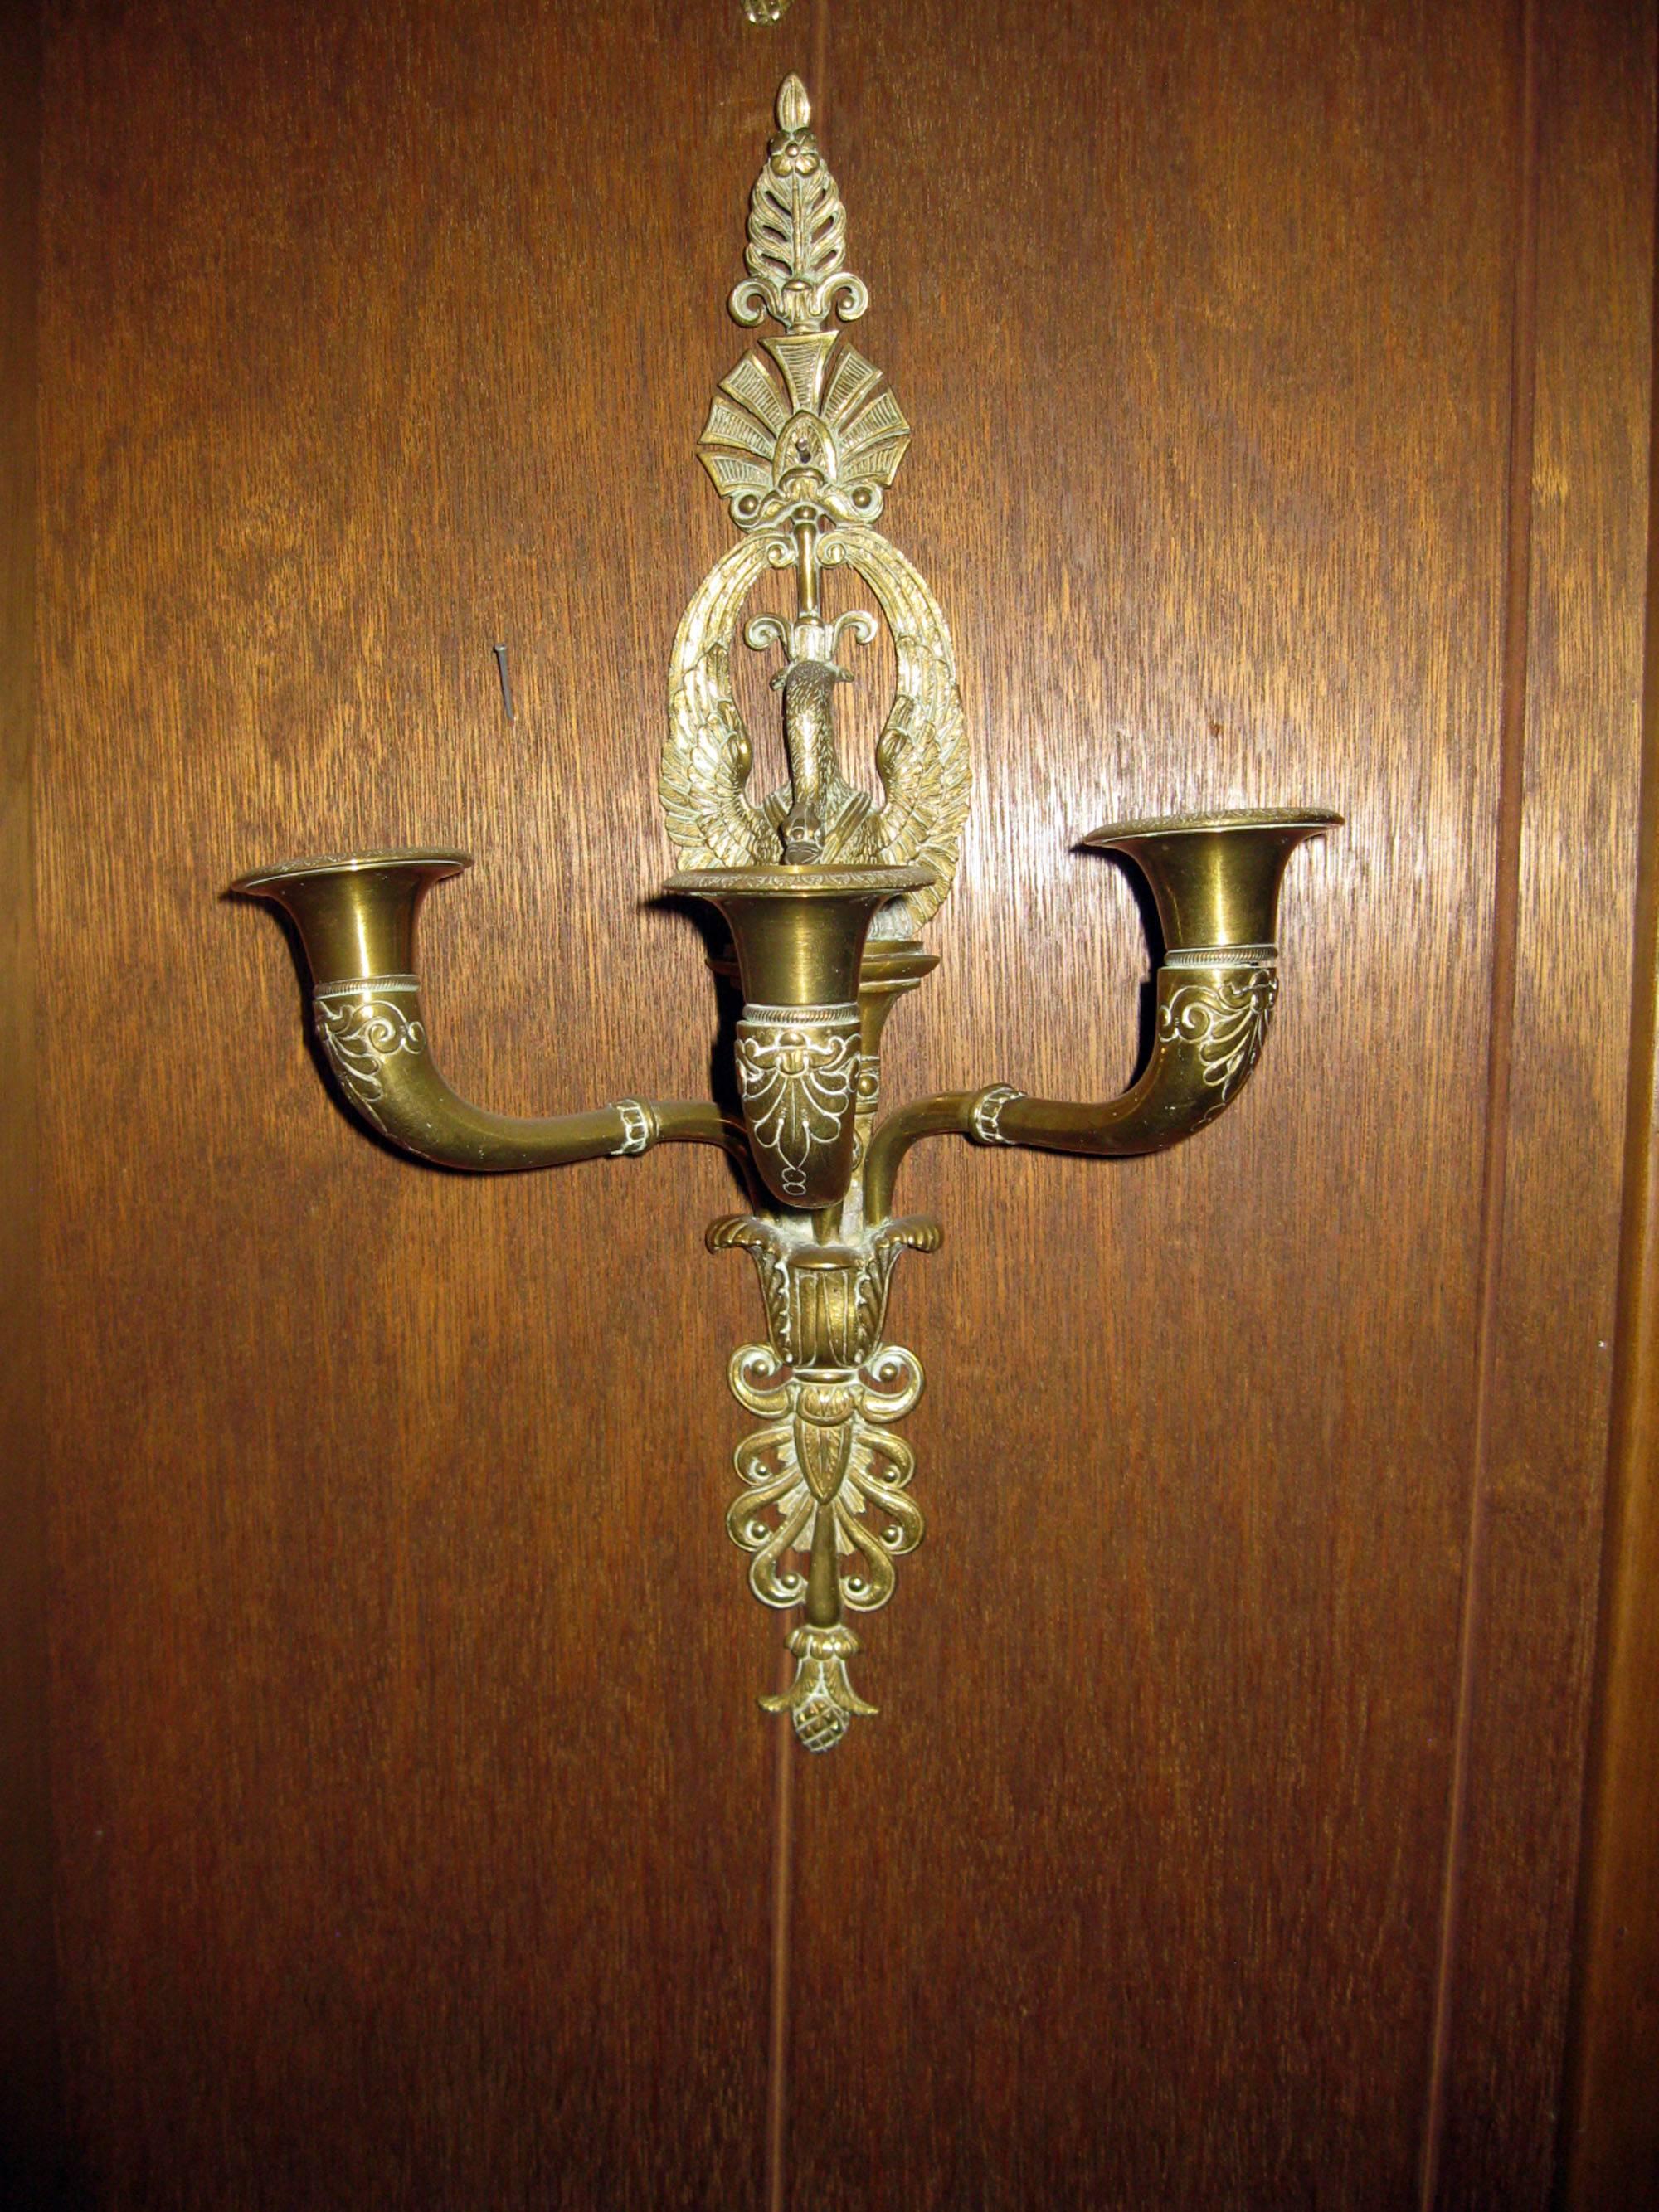 French Empire three light brass sconce pair with swan motif, circa 1820s . Features include incredible detail and great old patina. See measurements below.